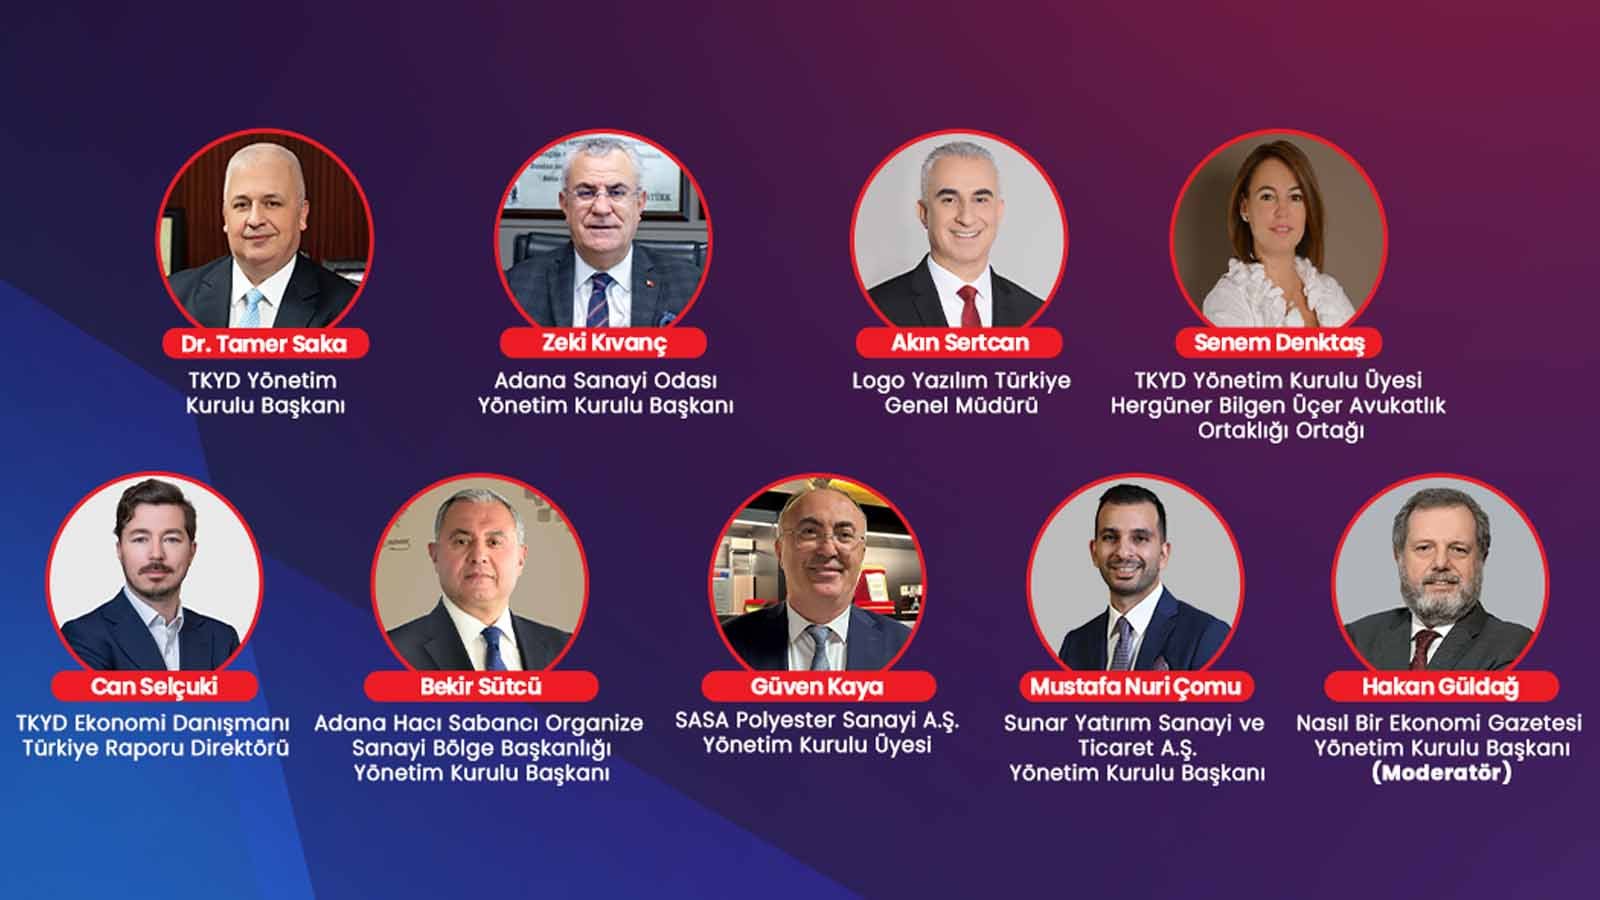 The Corporate Governance And Sustainability Panel Will Take Place In Adana